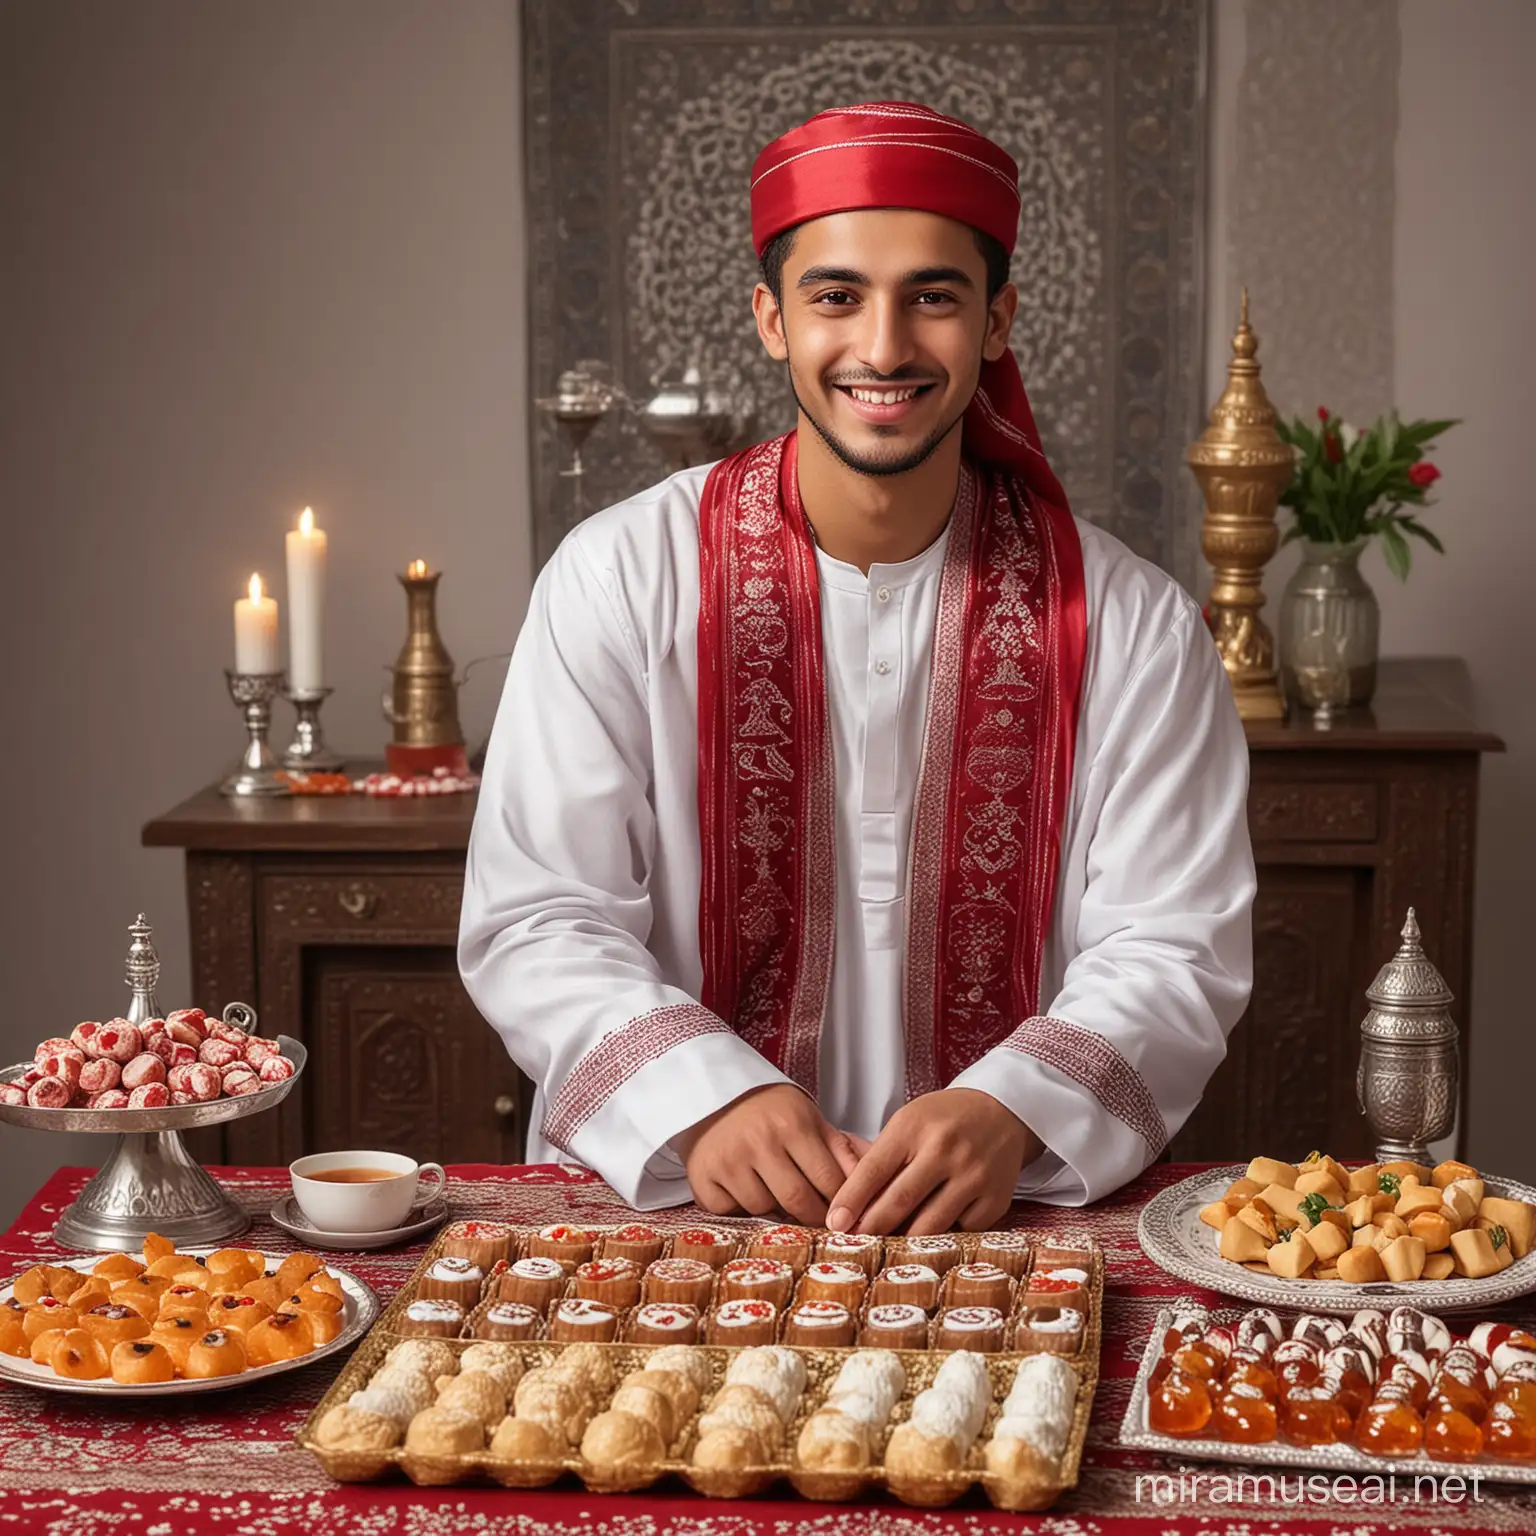 Eid alFitr Celebration Smiling Moroccan Man with Sweets and Tea